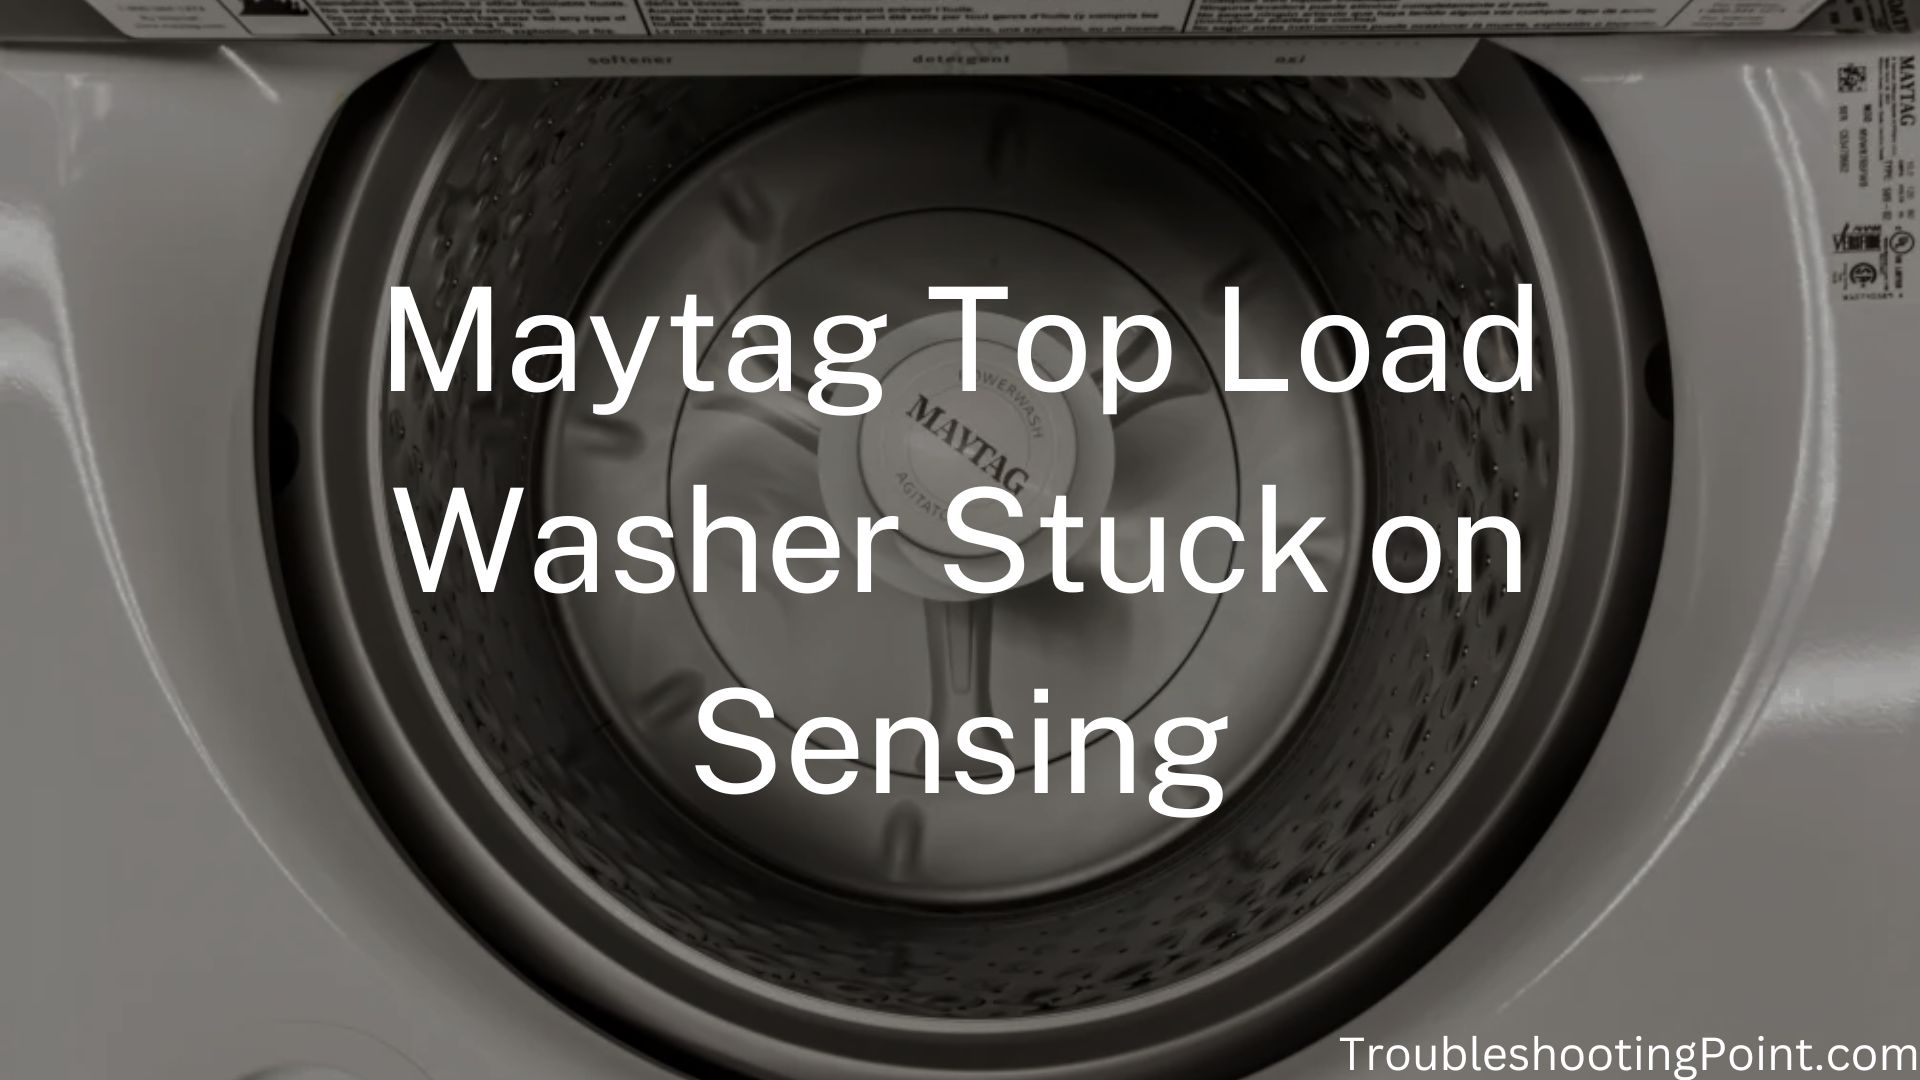 maytag top load washer stuck on sensing